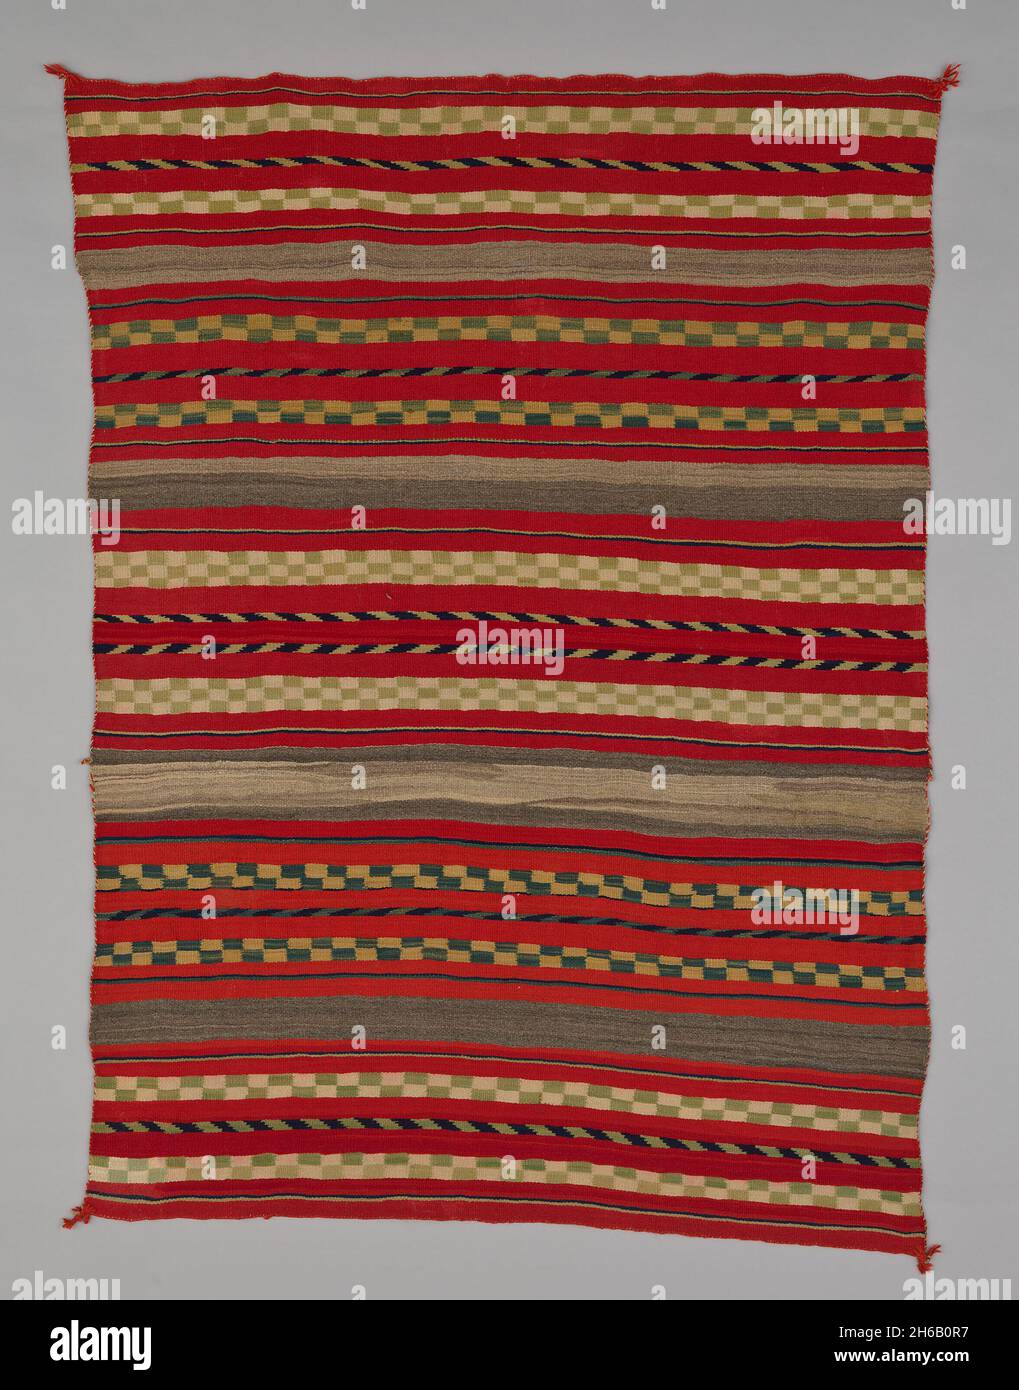 Sarape with Compound Banded Design, 1870/95. A work made of wool, plain weave and single interlocking tapestry weave; twined warp ends and selvages; looped and knotted augmented corner tassels. Stock Photo